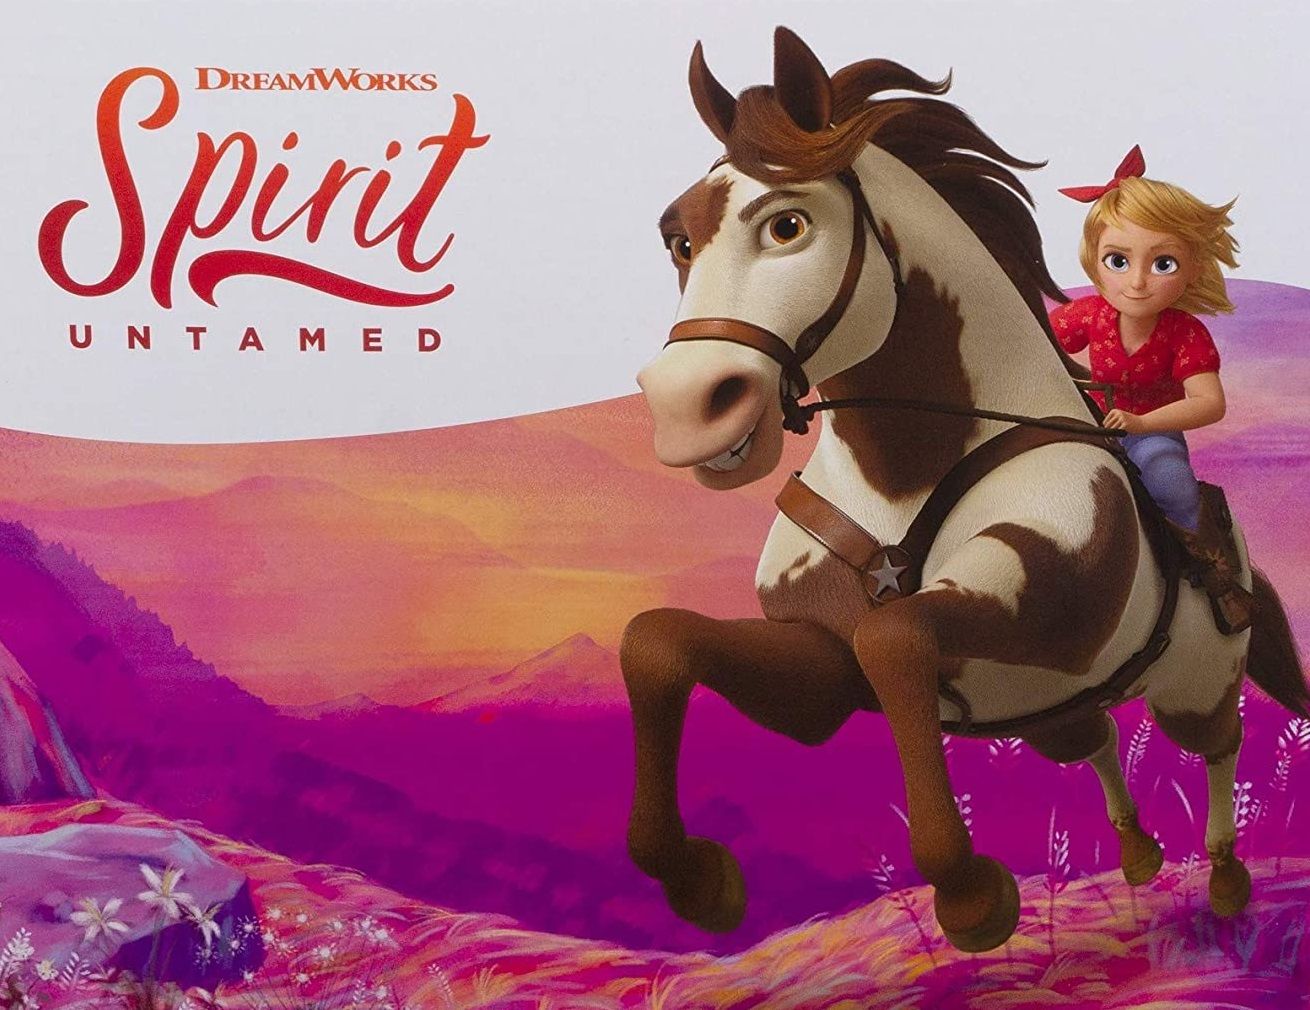 Spirit Untamed New Girls with Horses Posters